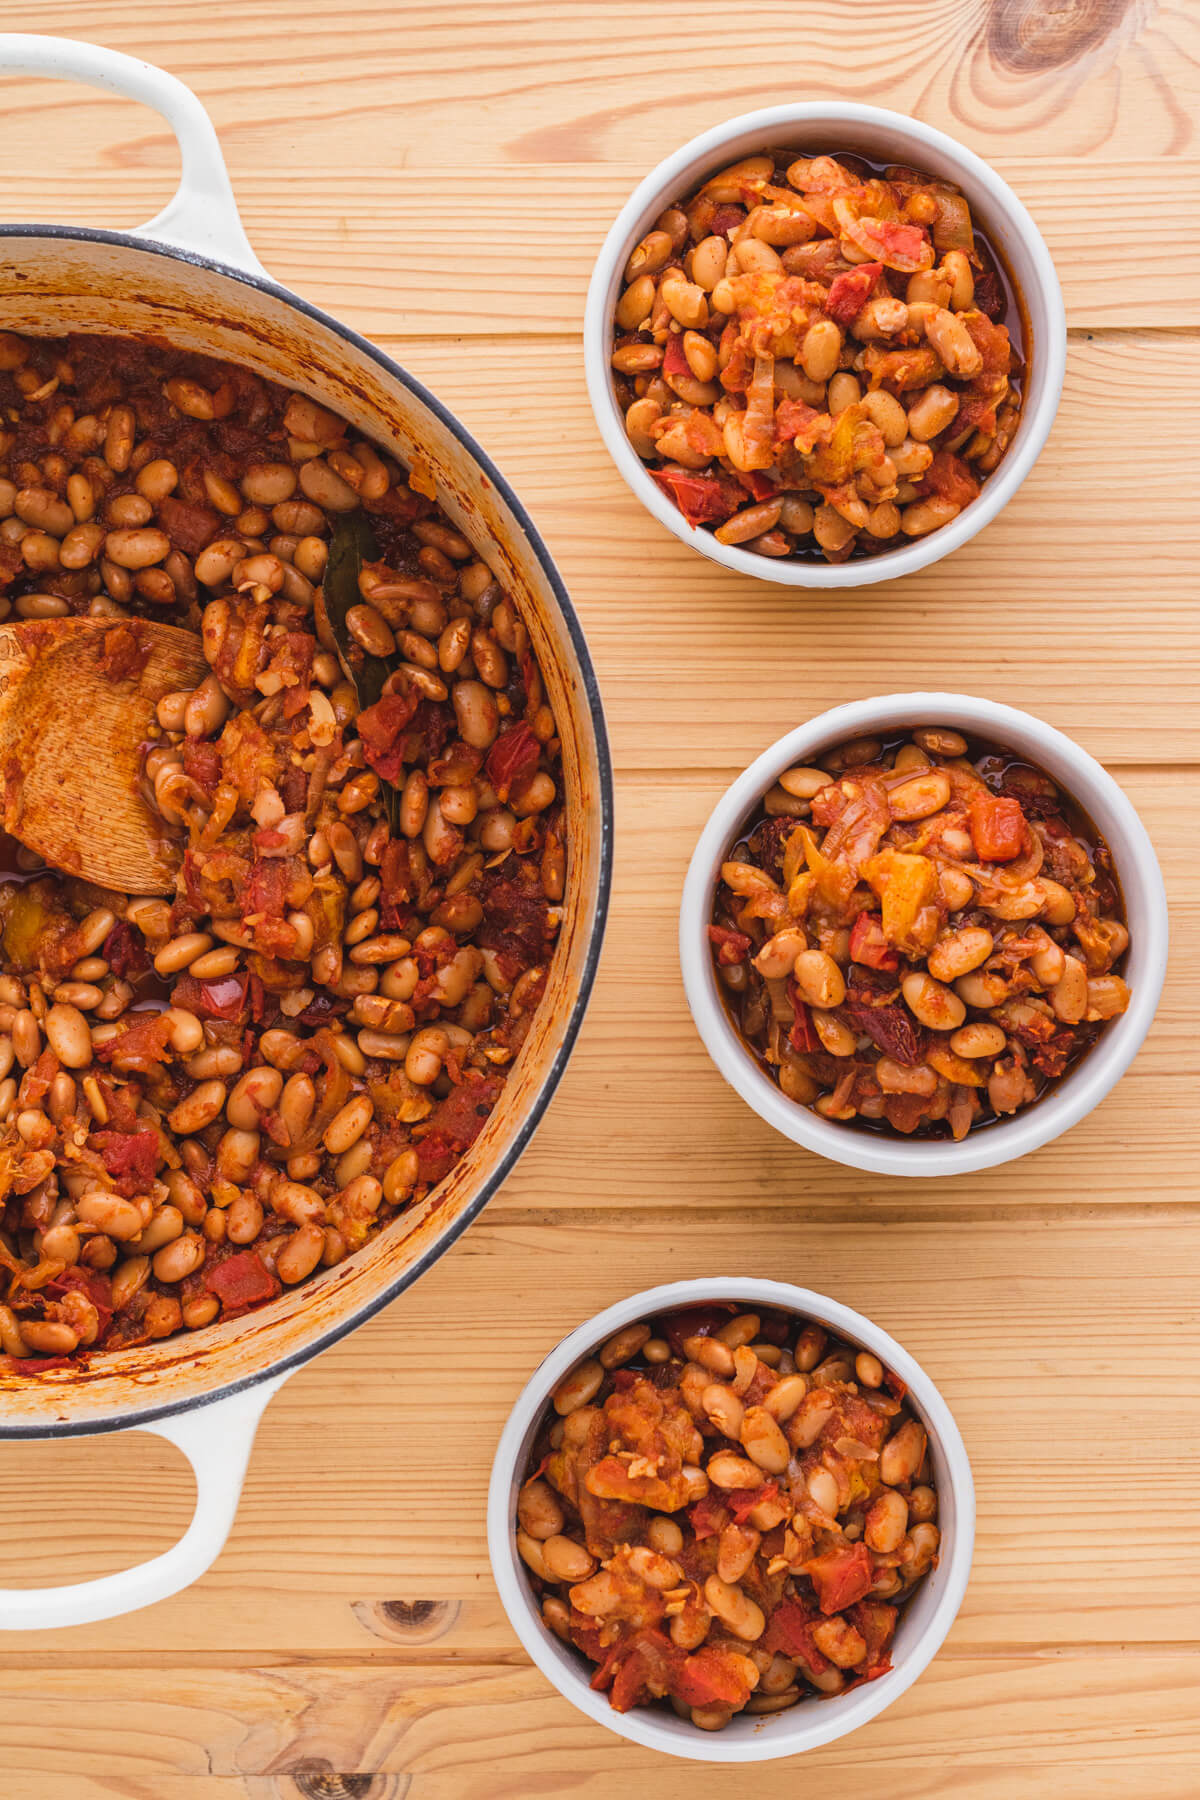 A Dutch oven and three bowls filled with chipotle pinto beans with peaches and tomatoes.